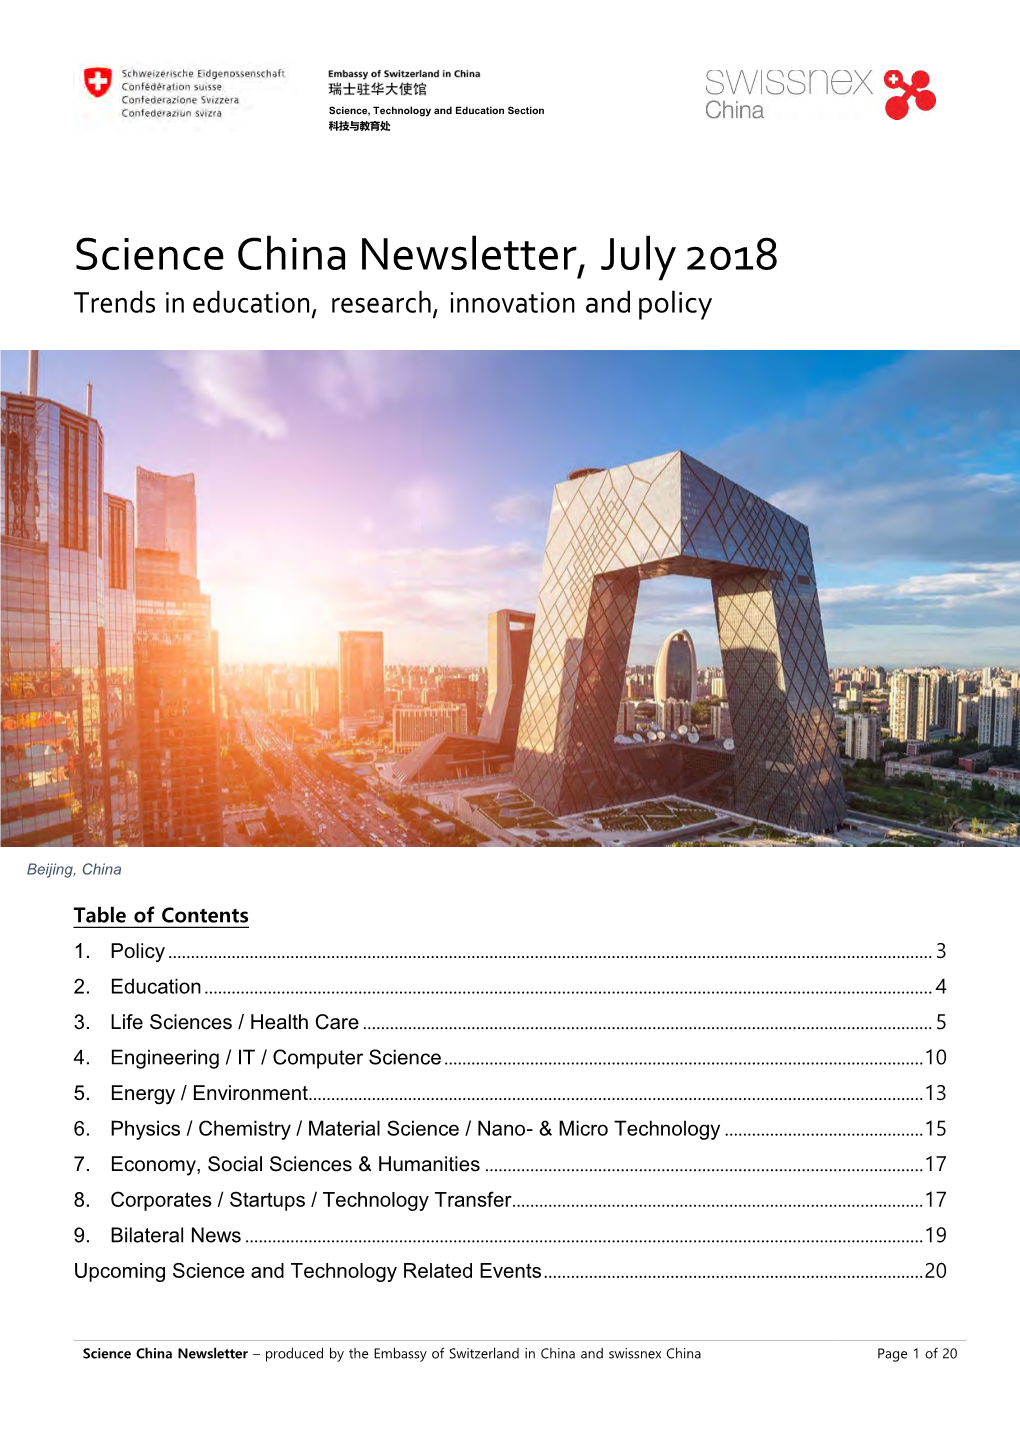 Science China Newsletter, July 2018 Trends in Education, Research, Innovation and Policy